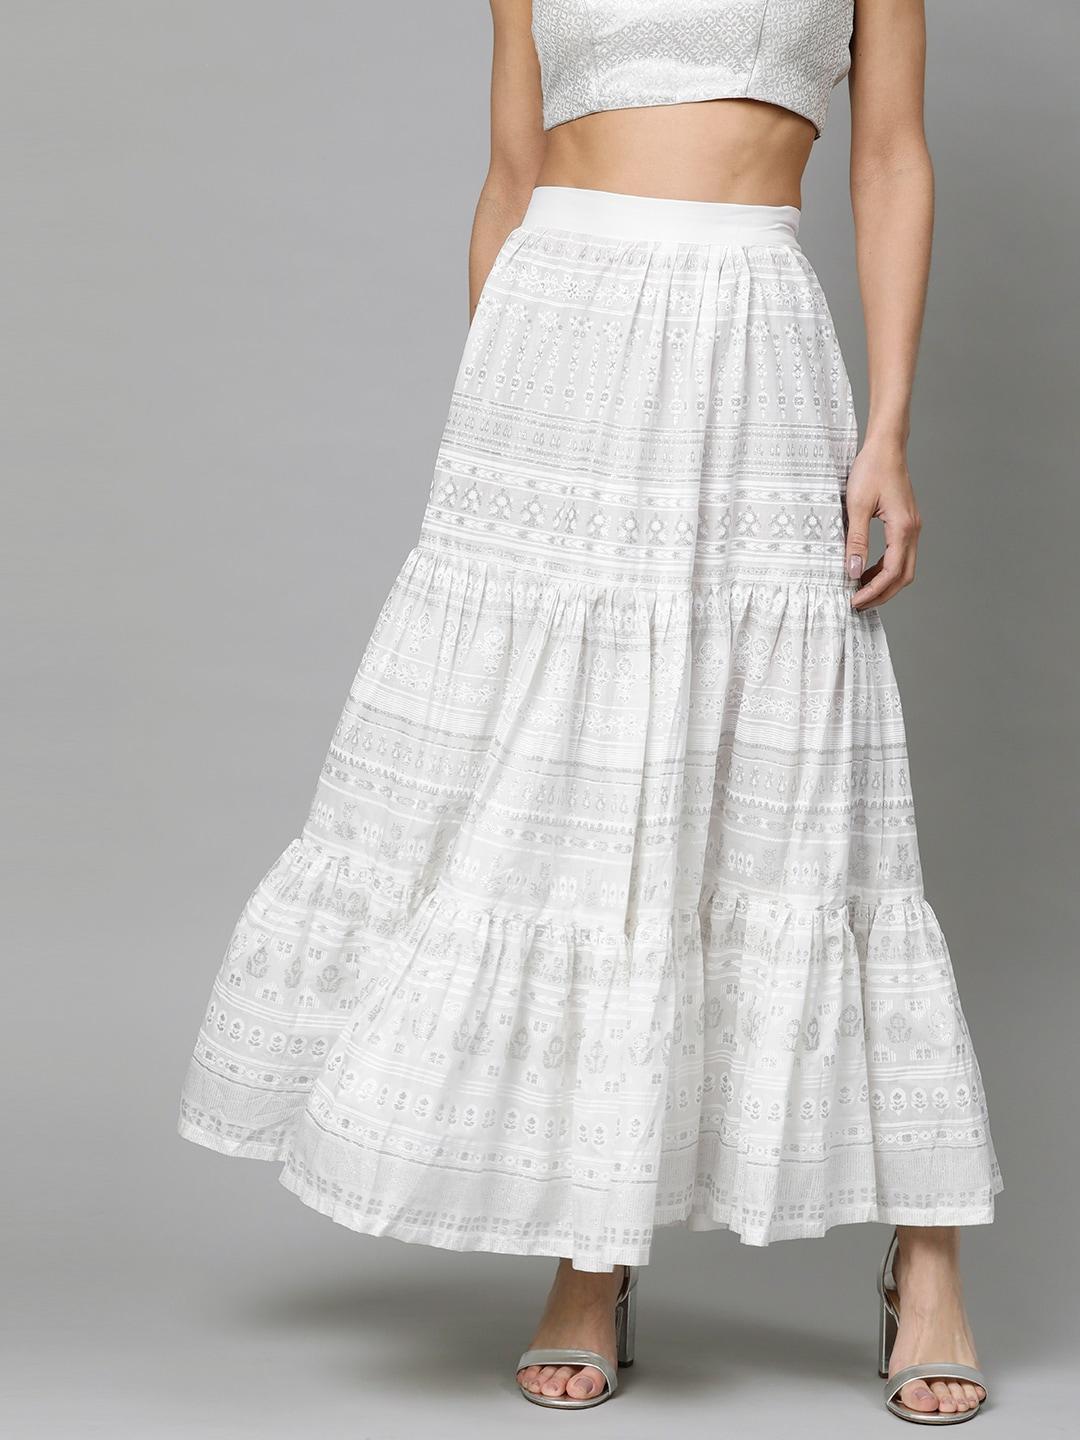 W Women White Pure Cotton Floral Printed Tiered A-Line Skirt